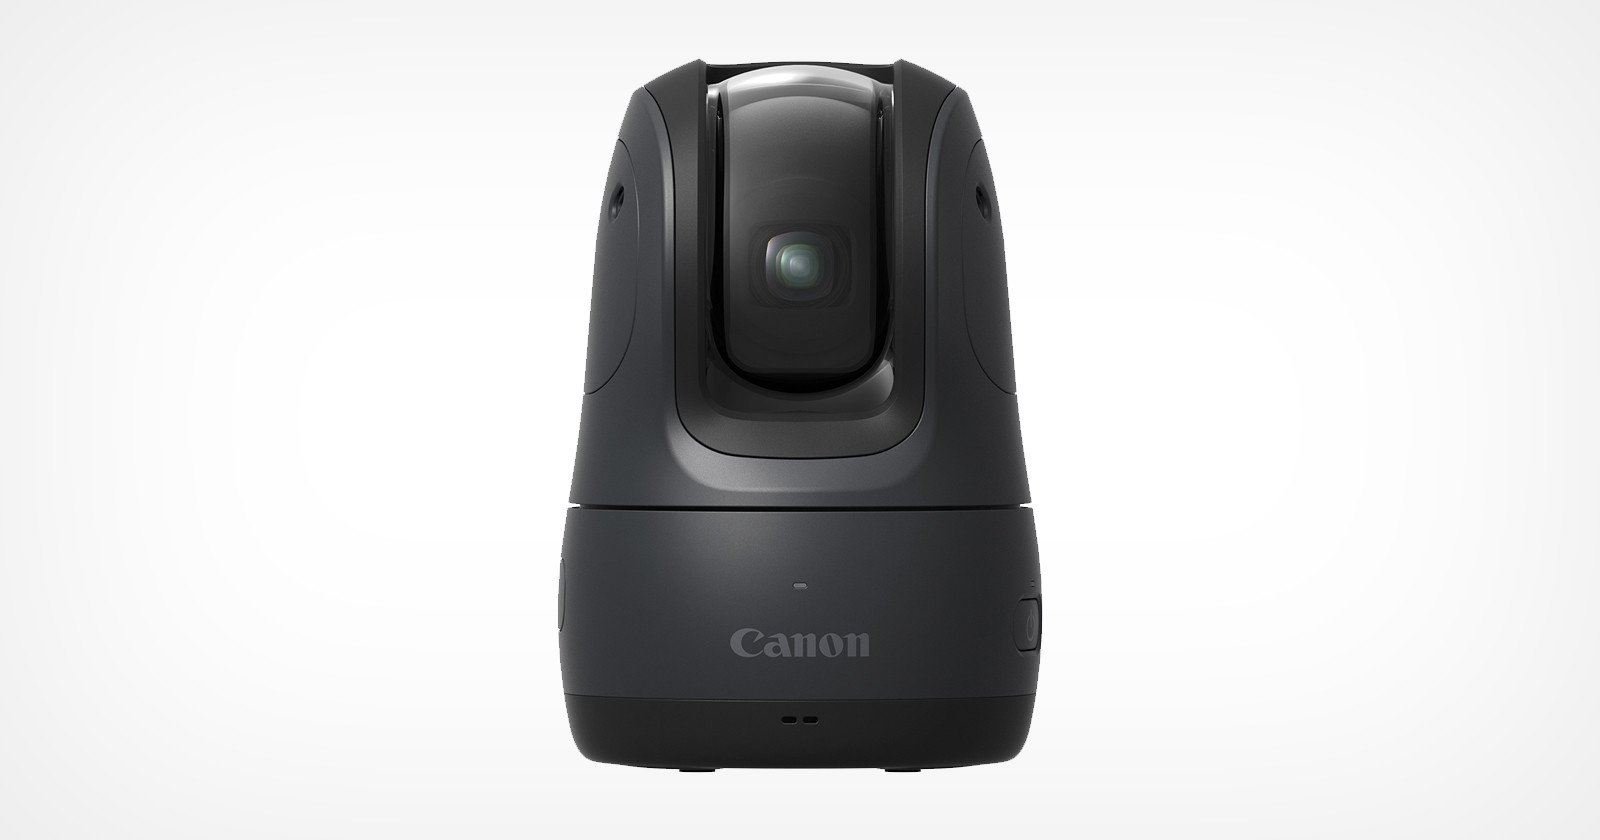 Canon Brings the PowerShot PICK Active Tracking Camera to the U.S.